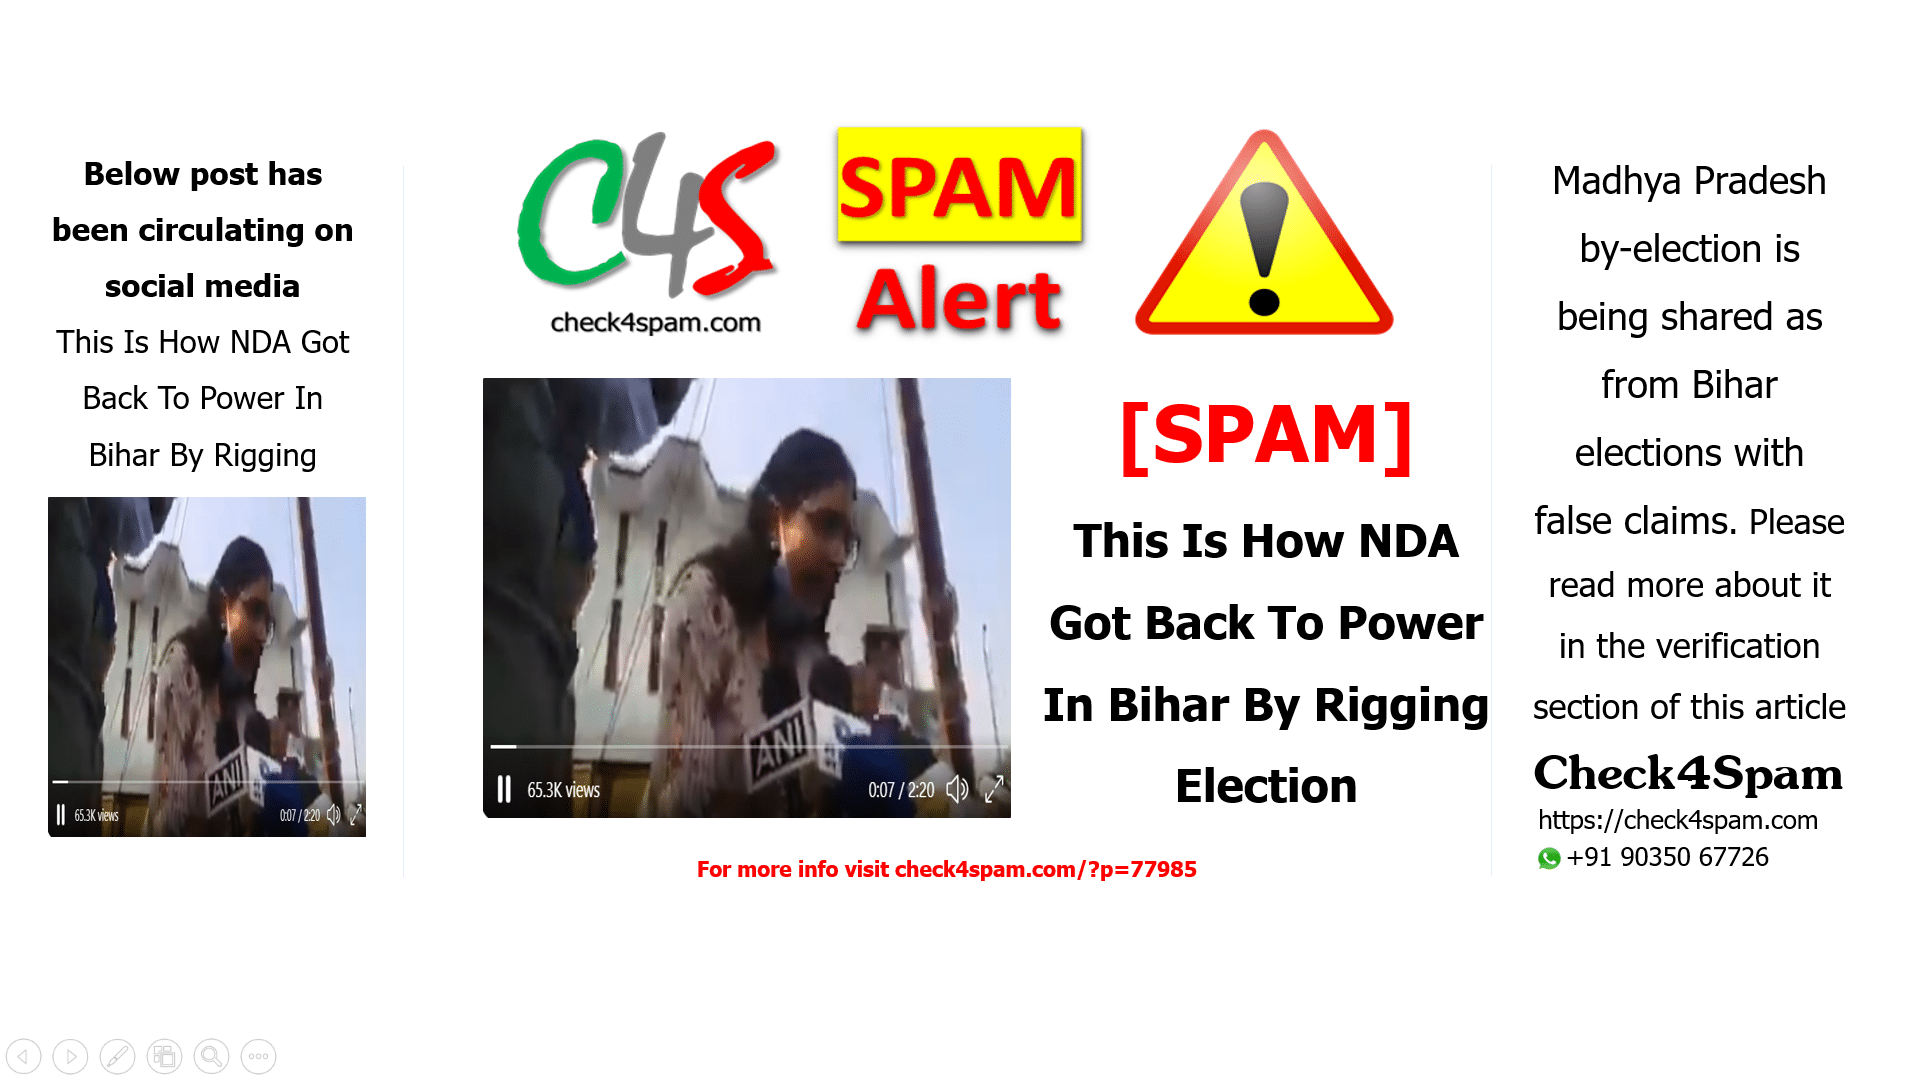 This Is How NDA Got Back To Power In Bihar By Rigging Election